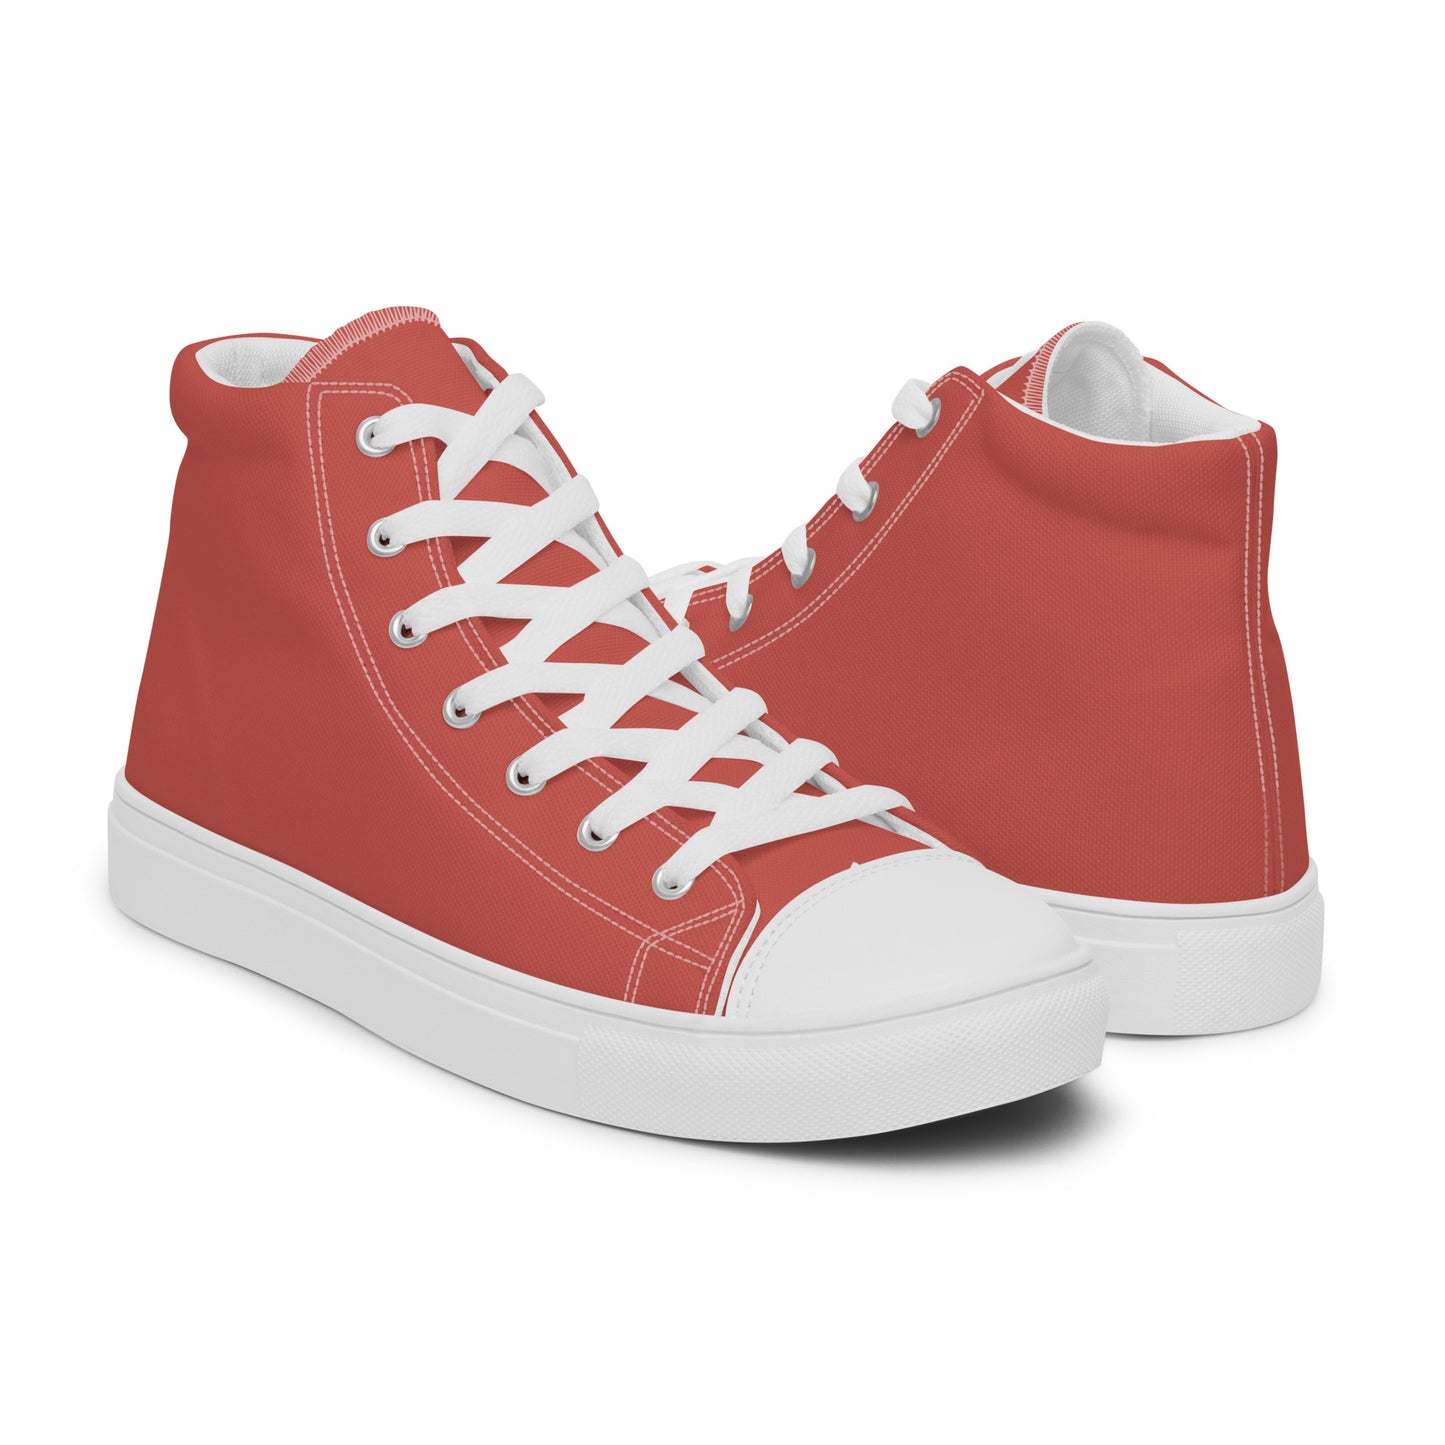 Terracota - Sustainably Made Men's High Top Canvas Shoes